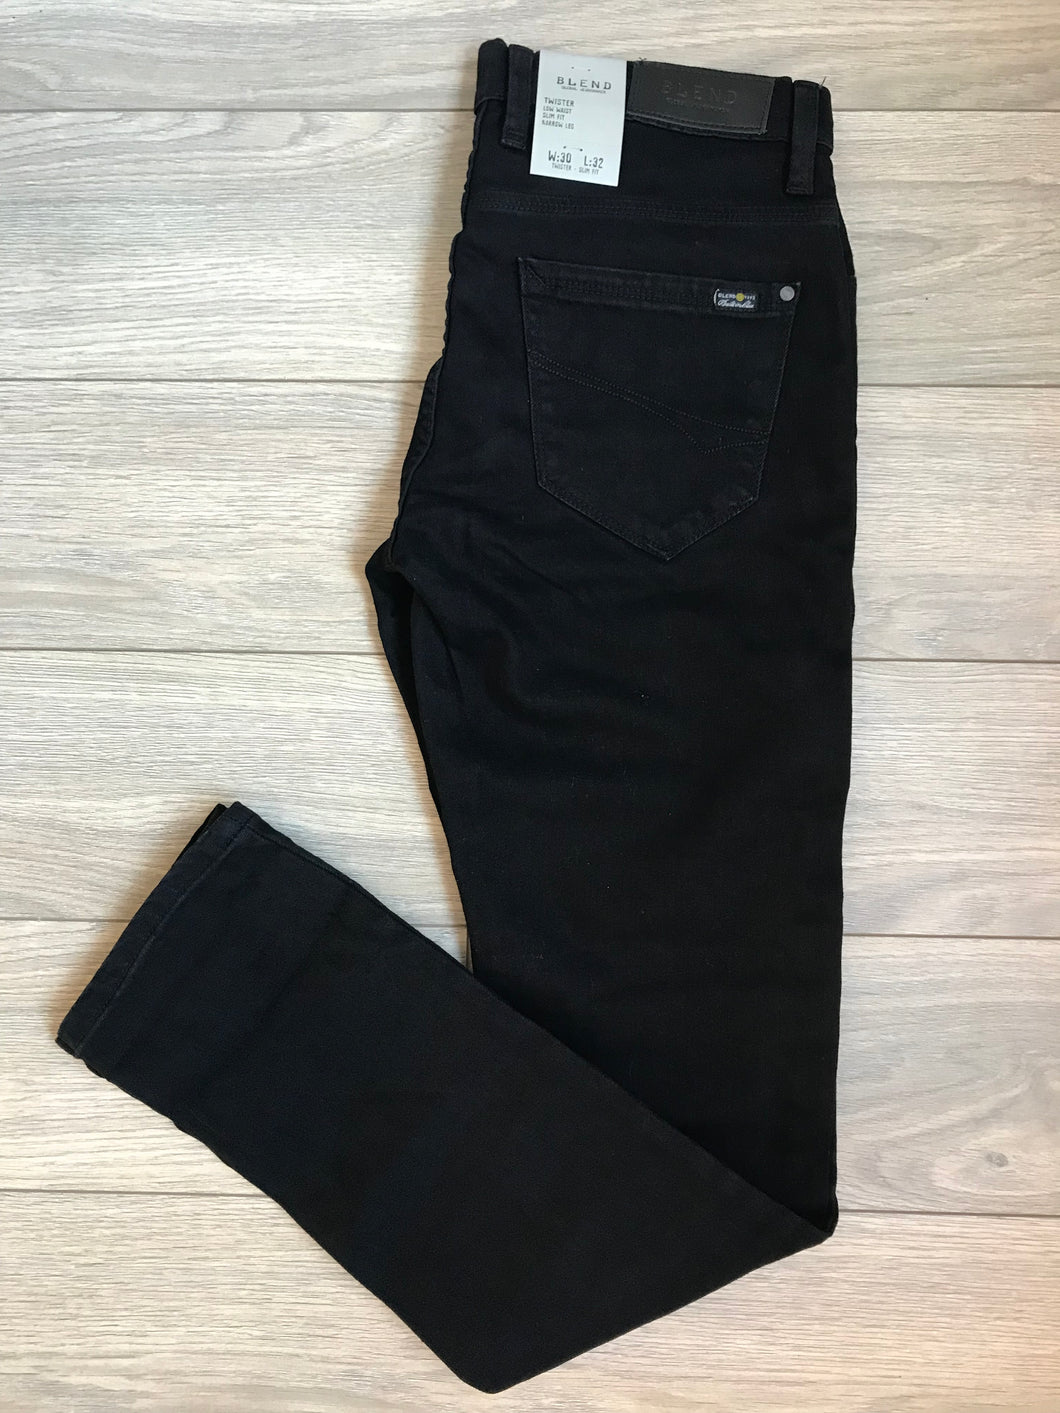 Jeans Twister Fit Pure Black from Blend. A great pai of jeans to wear with a plain t shirt or a shirt and formal jacket. Made in partnership with thetter Cotton Initiative Be to improve cotton farming globally.